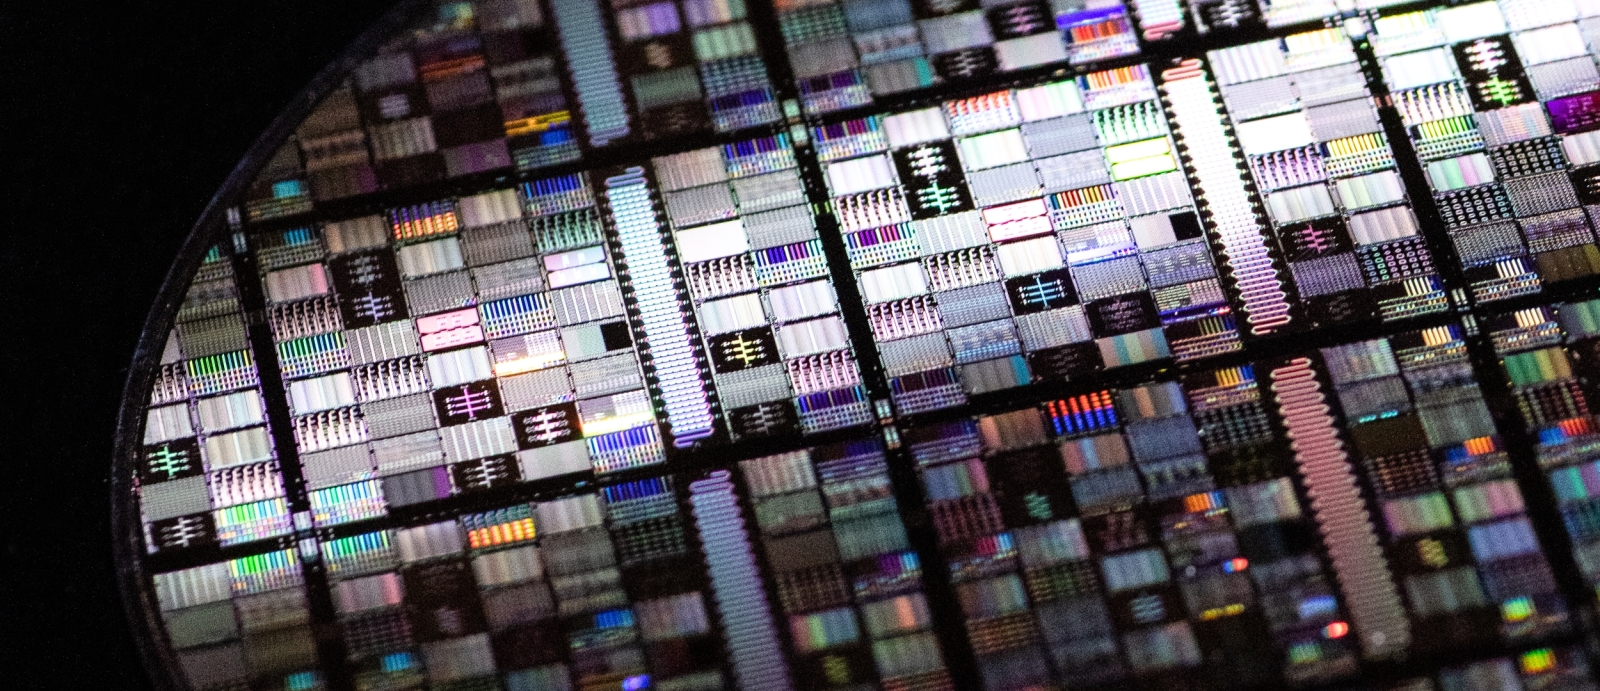 A close-up shot of a wafer containing circuits